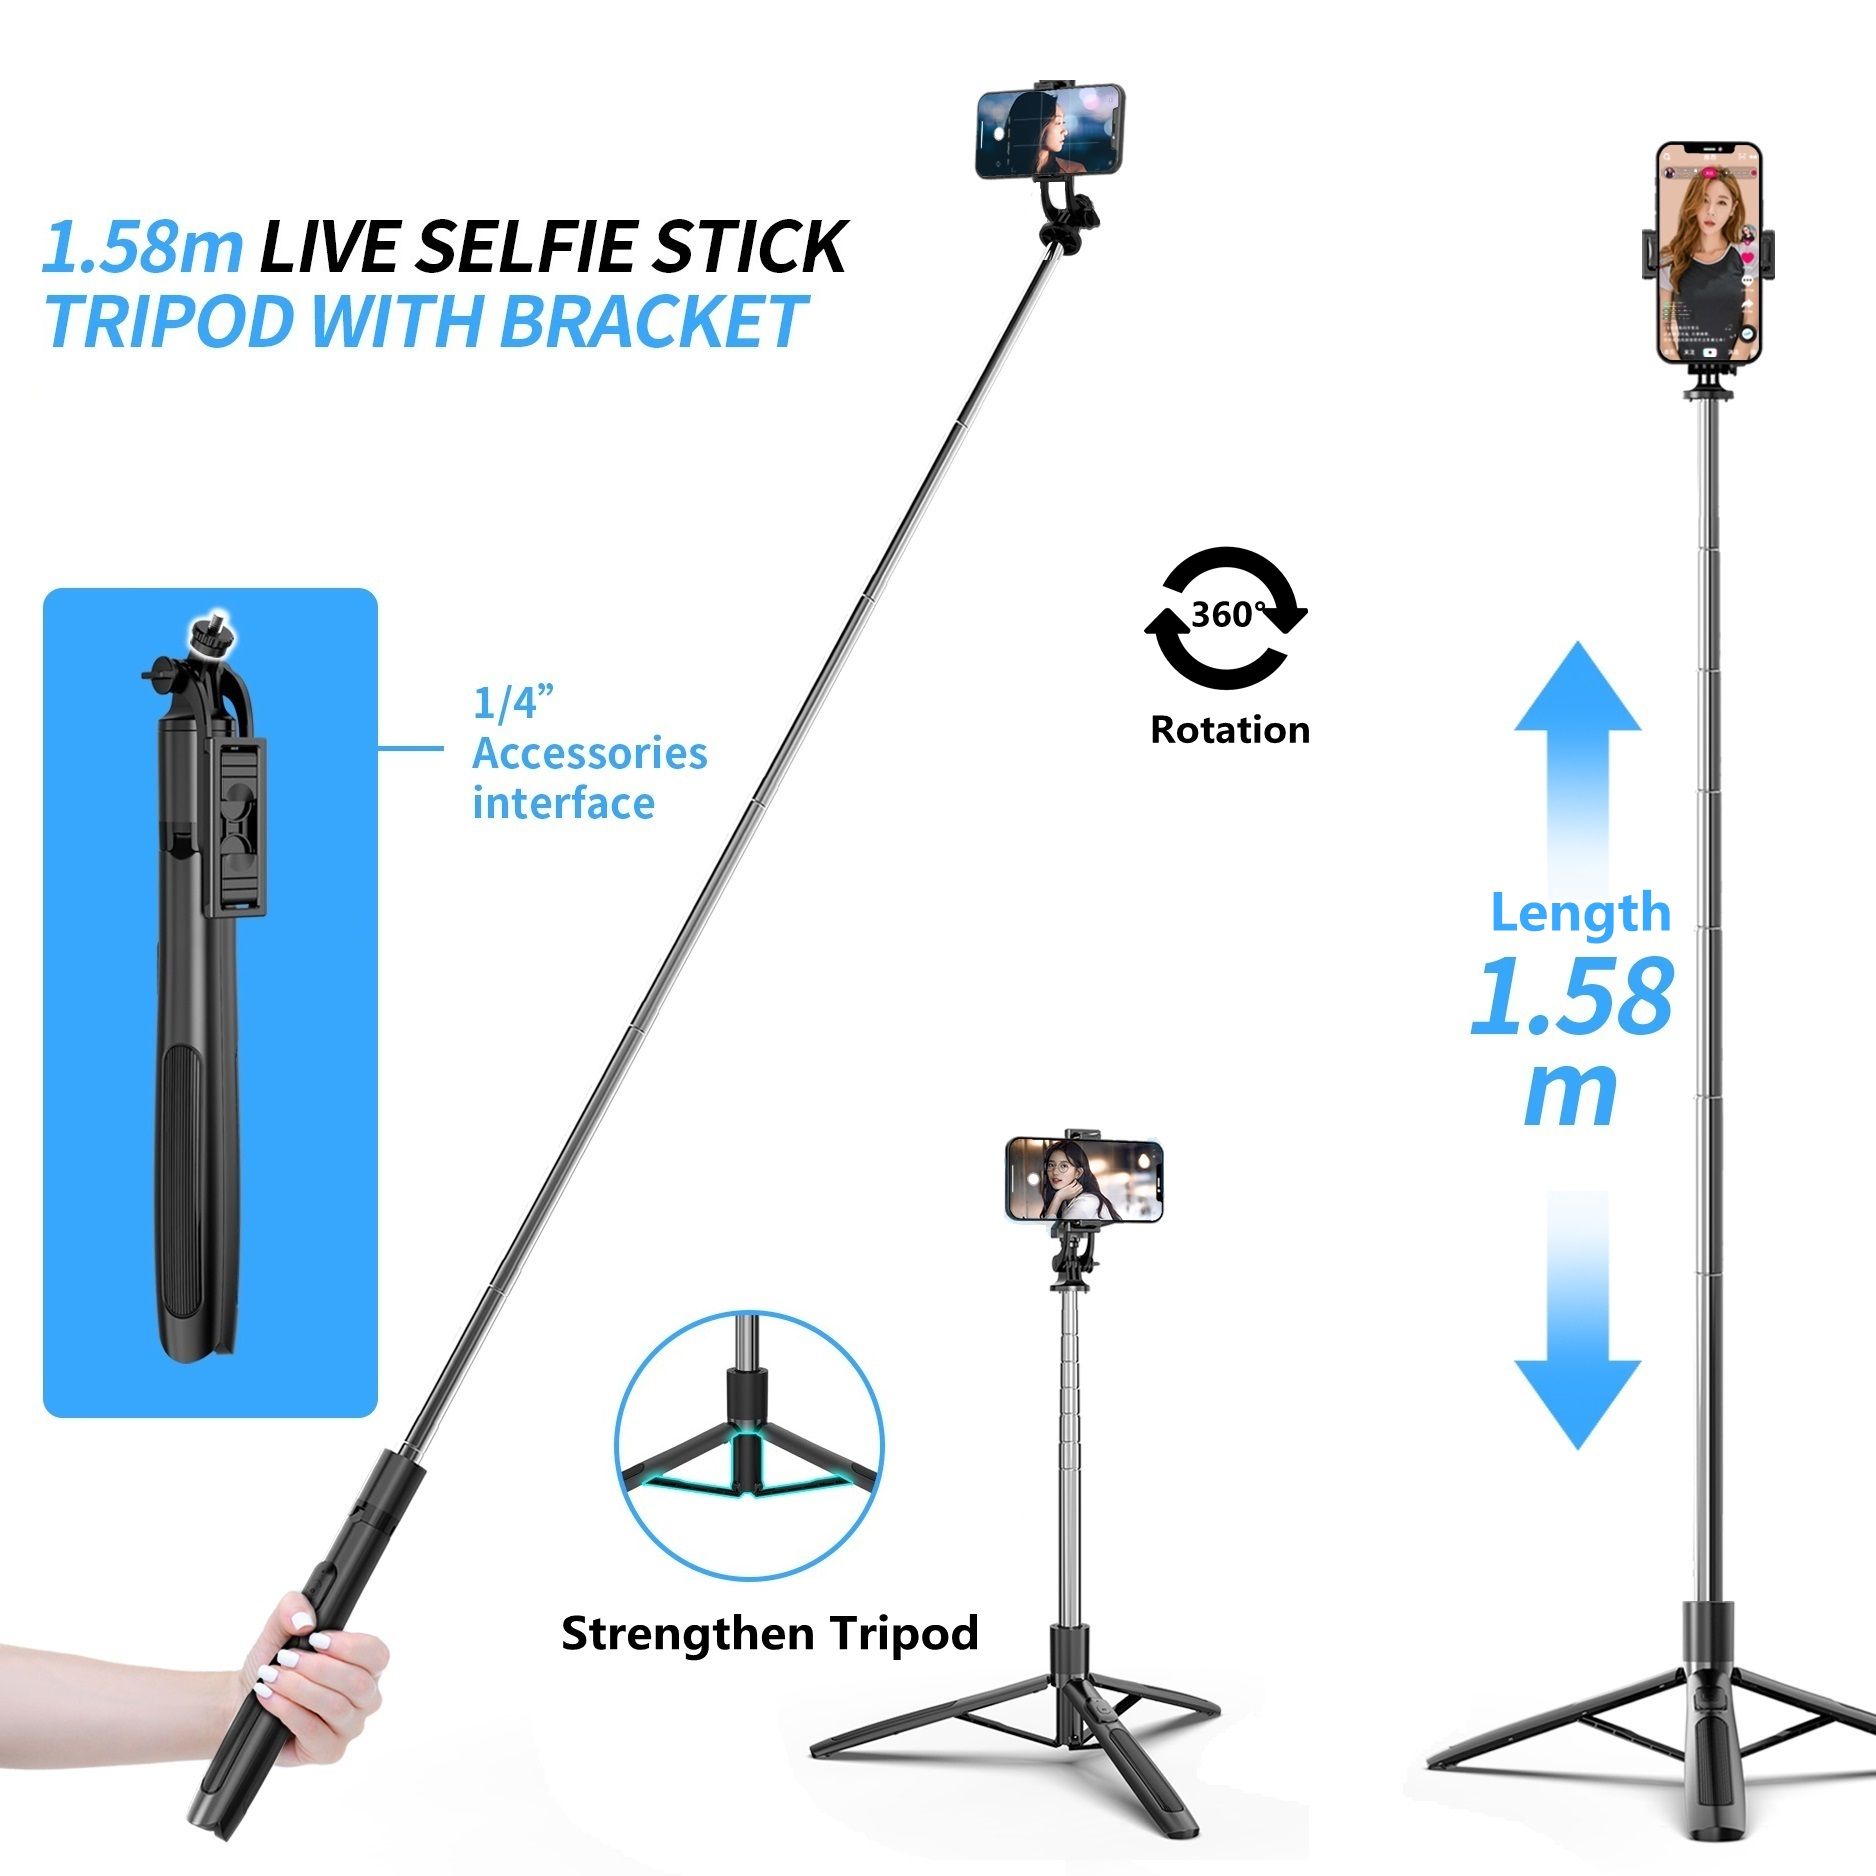 COOL DIER 1580mm New Wireless Selfie Stick Tripod Foldable Monopod For Gopro Action Cameras Smartphones